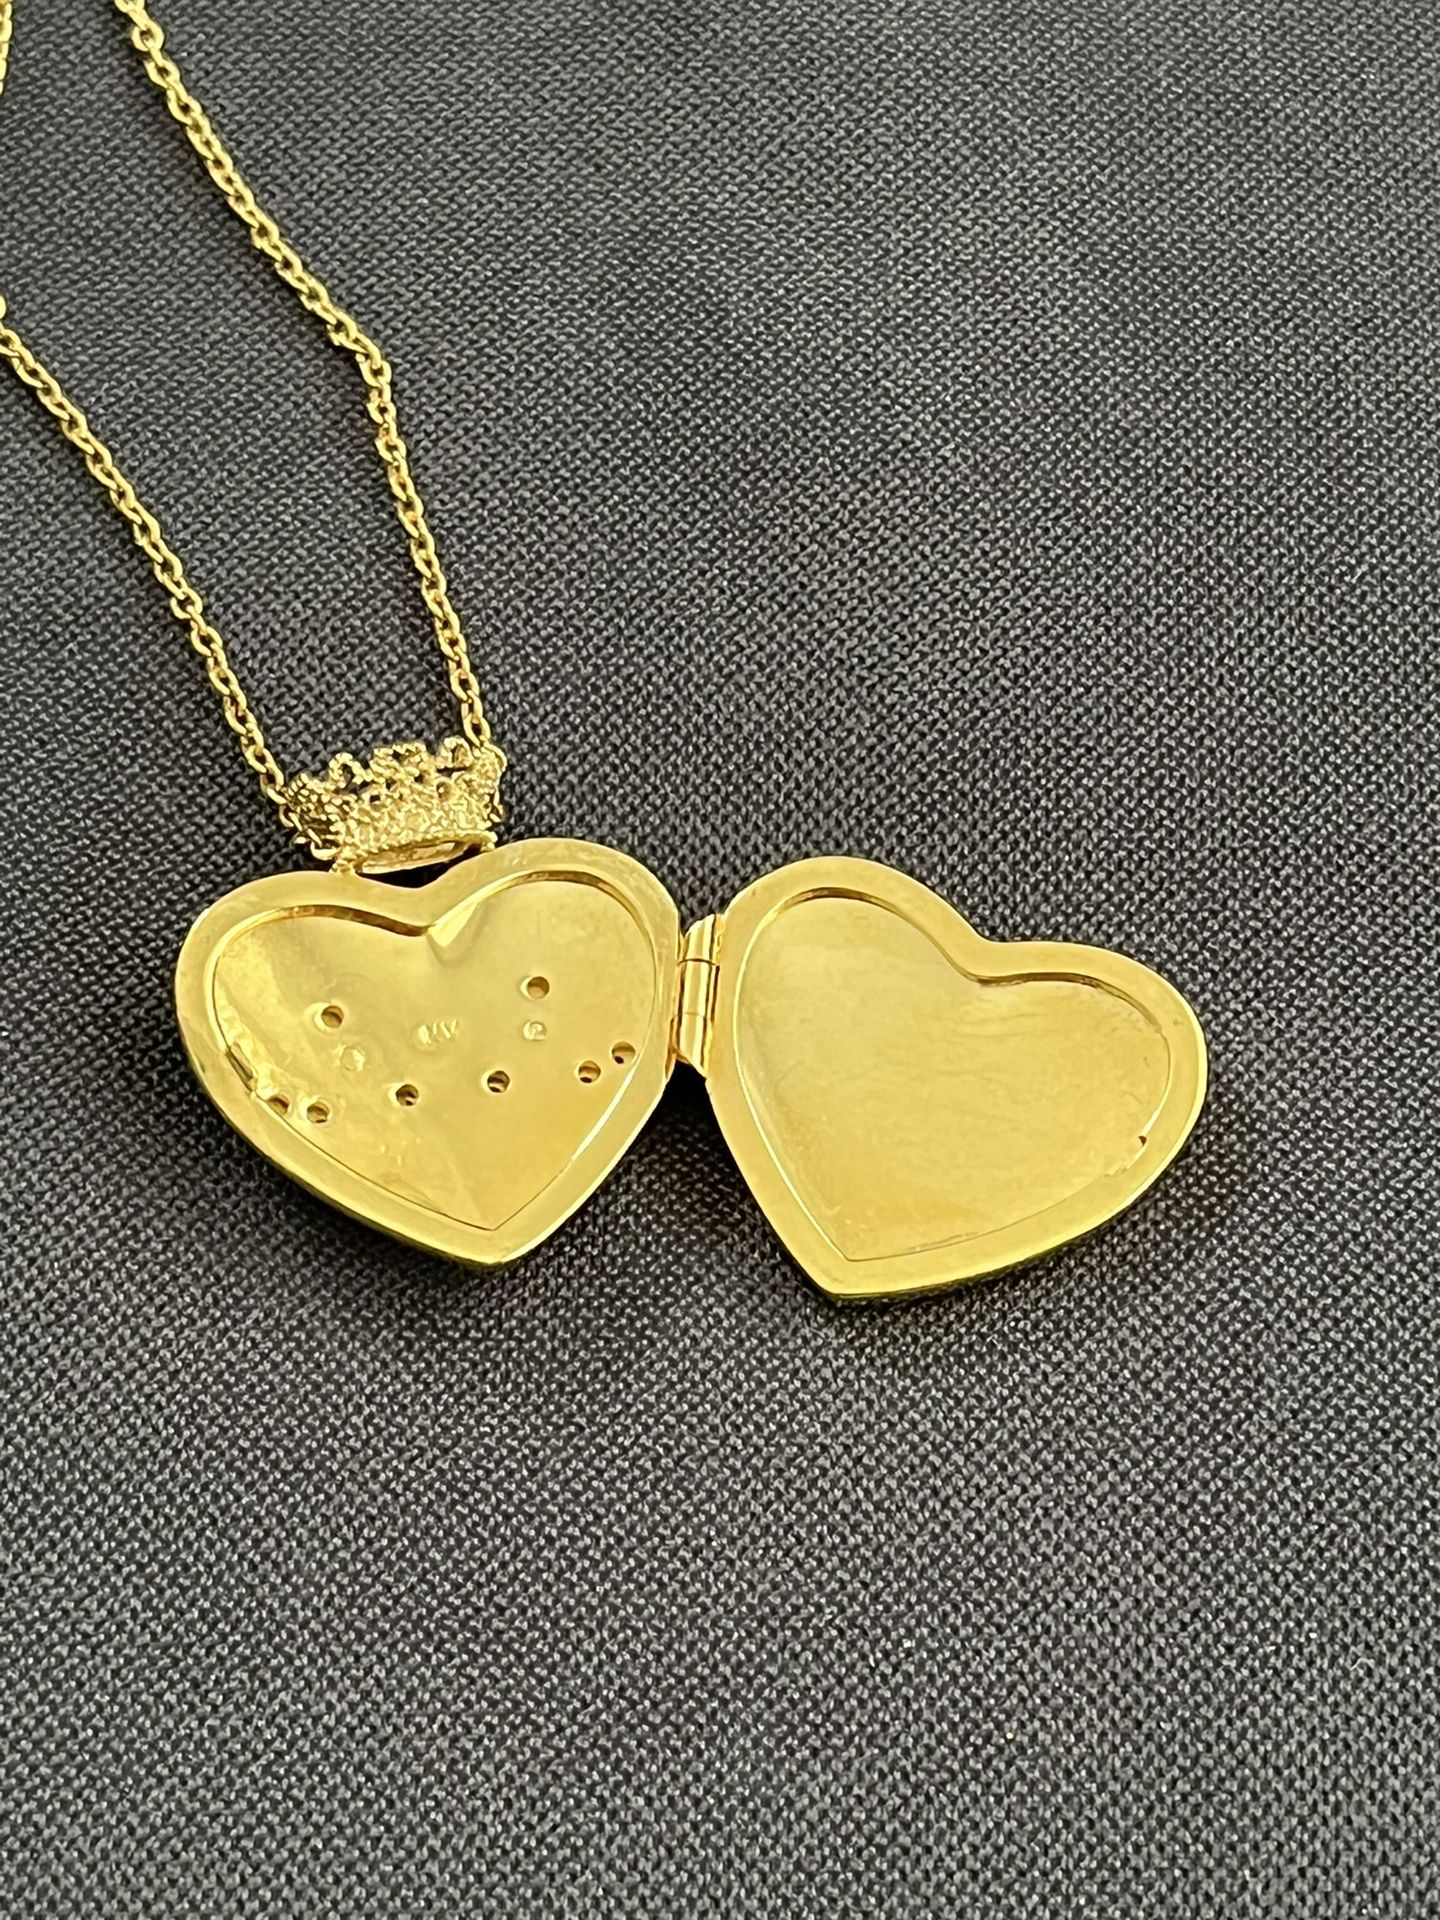 Gold Color Jewelry Locket Heart With Chain Necklace 